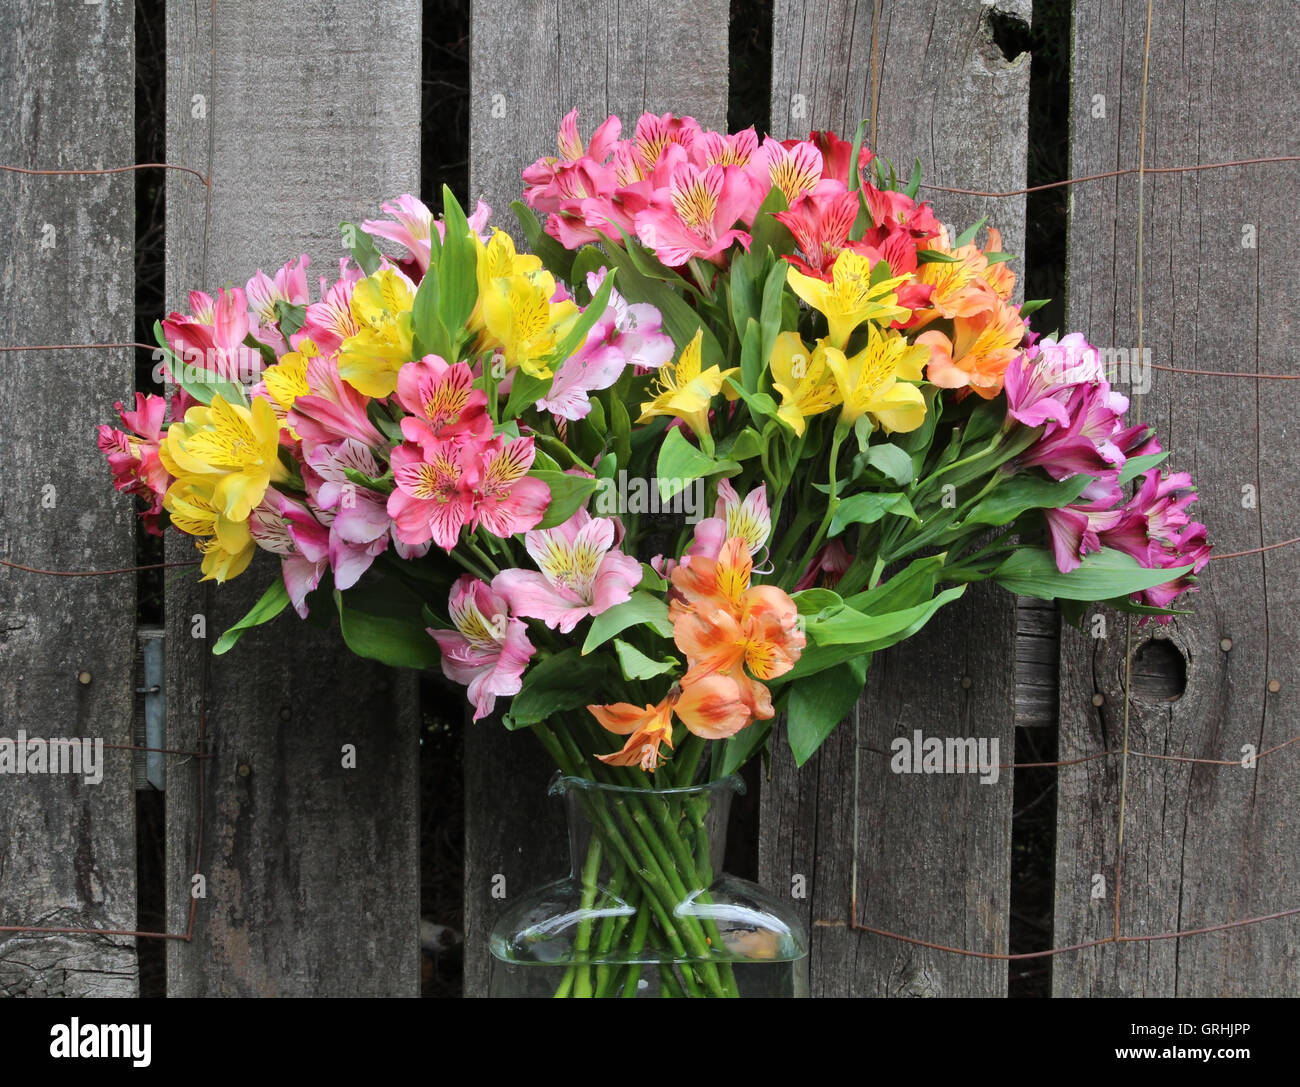 Peruvian lilies in a clear glass vase with a rustic fence backdrop Stock Photo